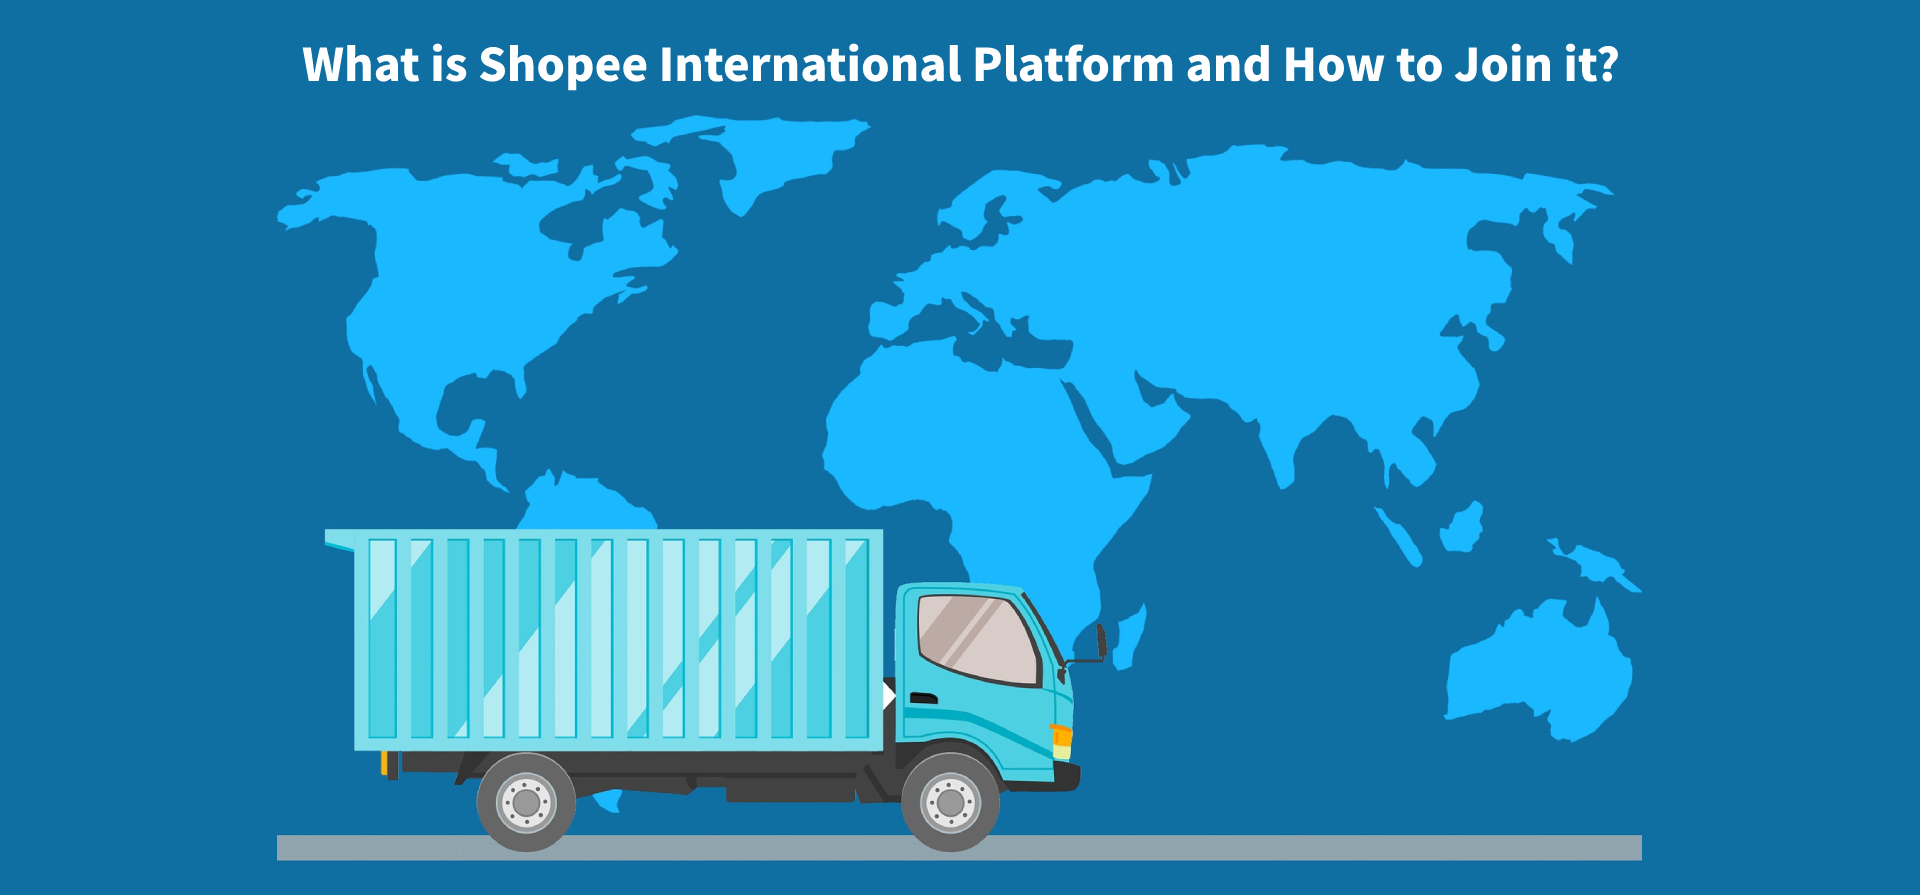 What is Shopee International Platform and How to Join it?